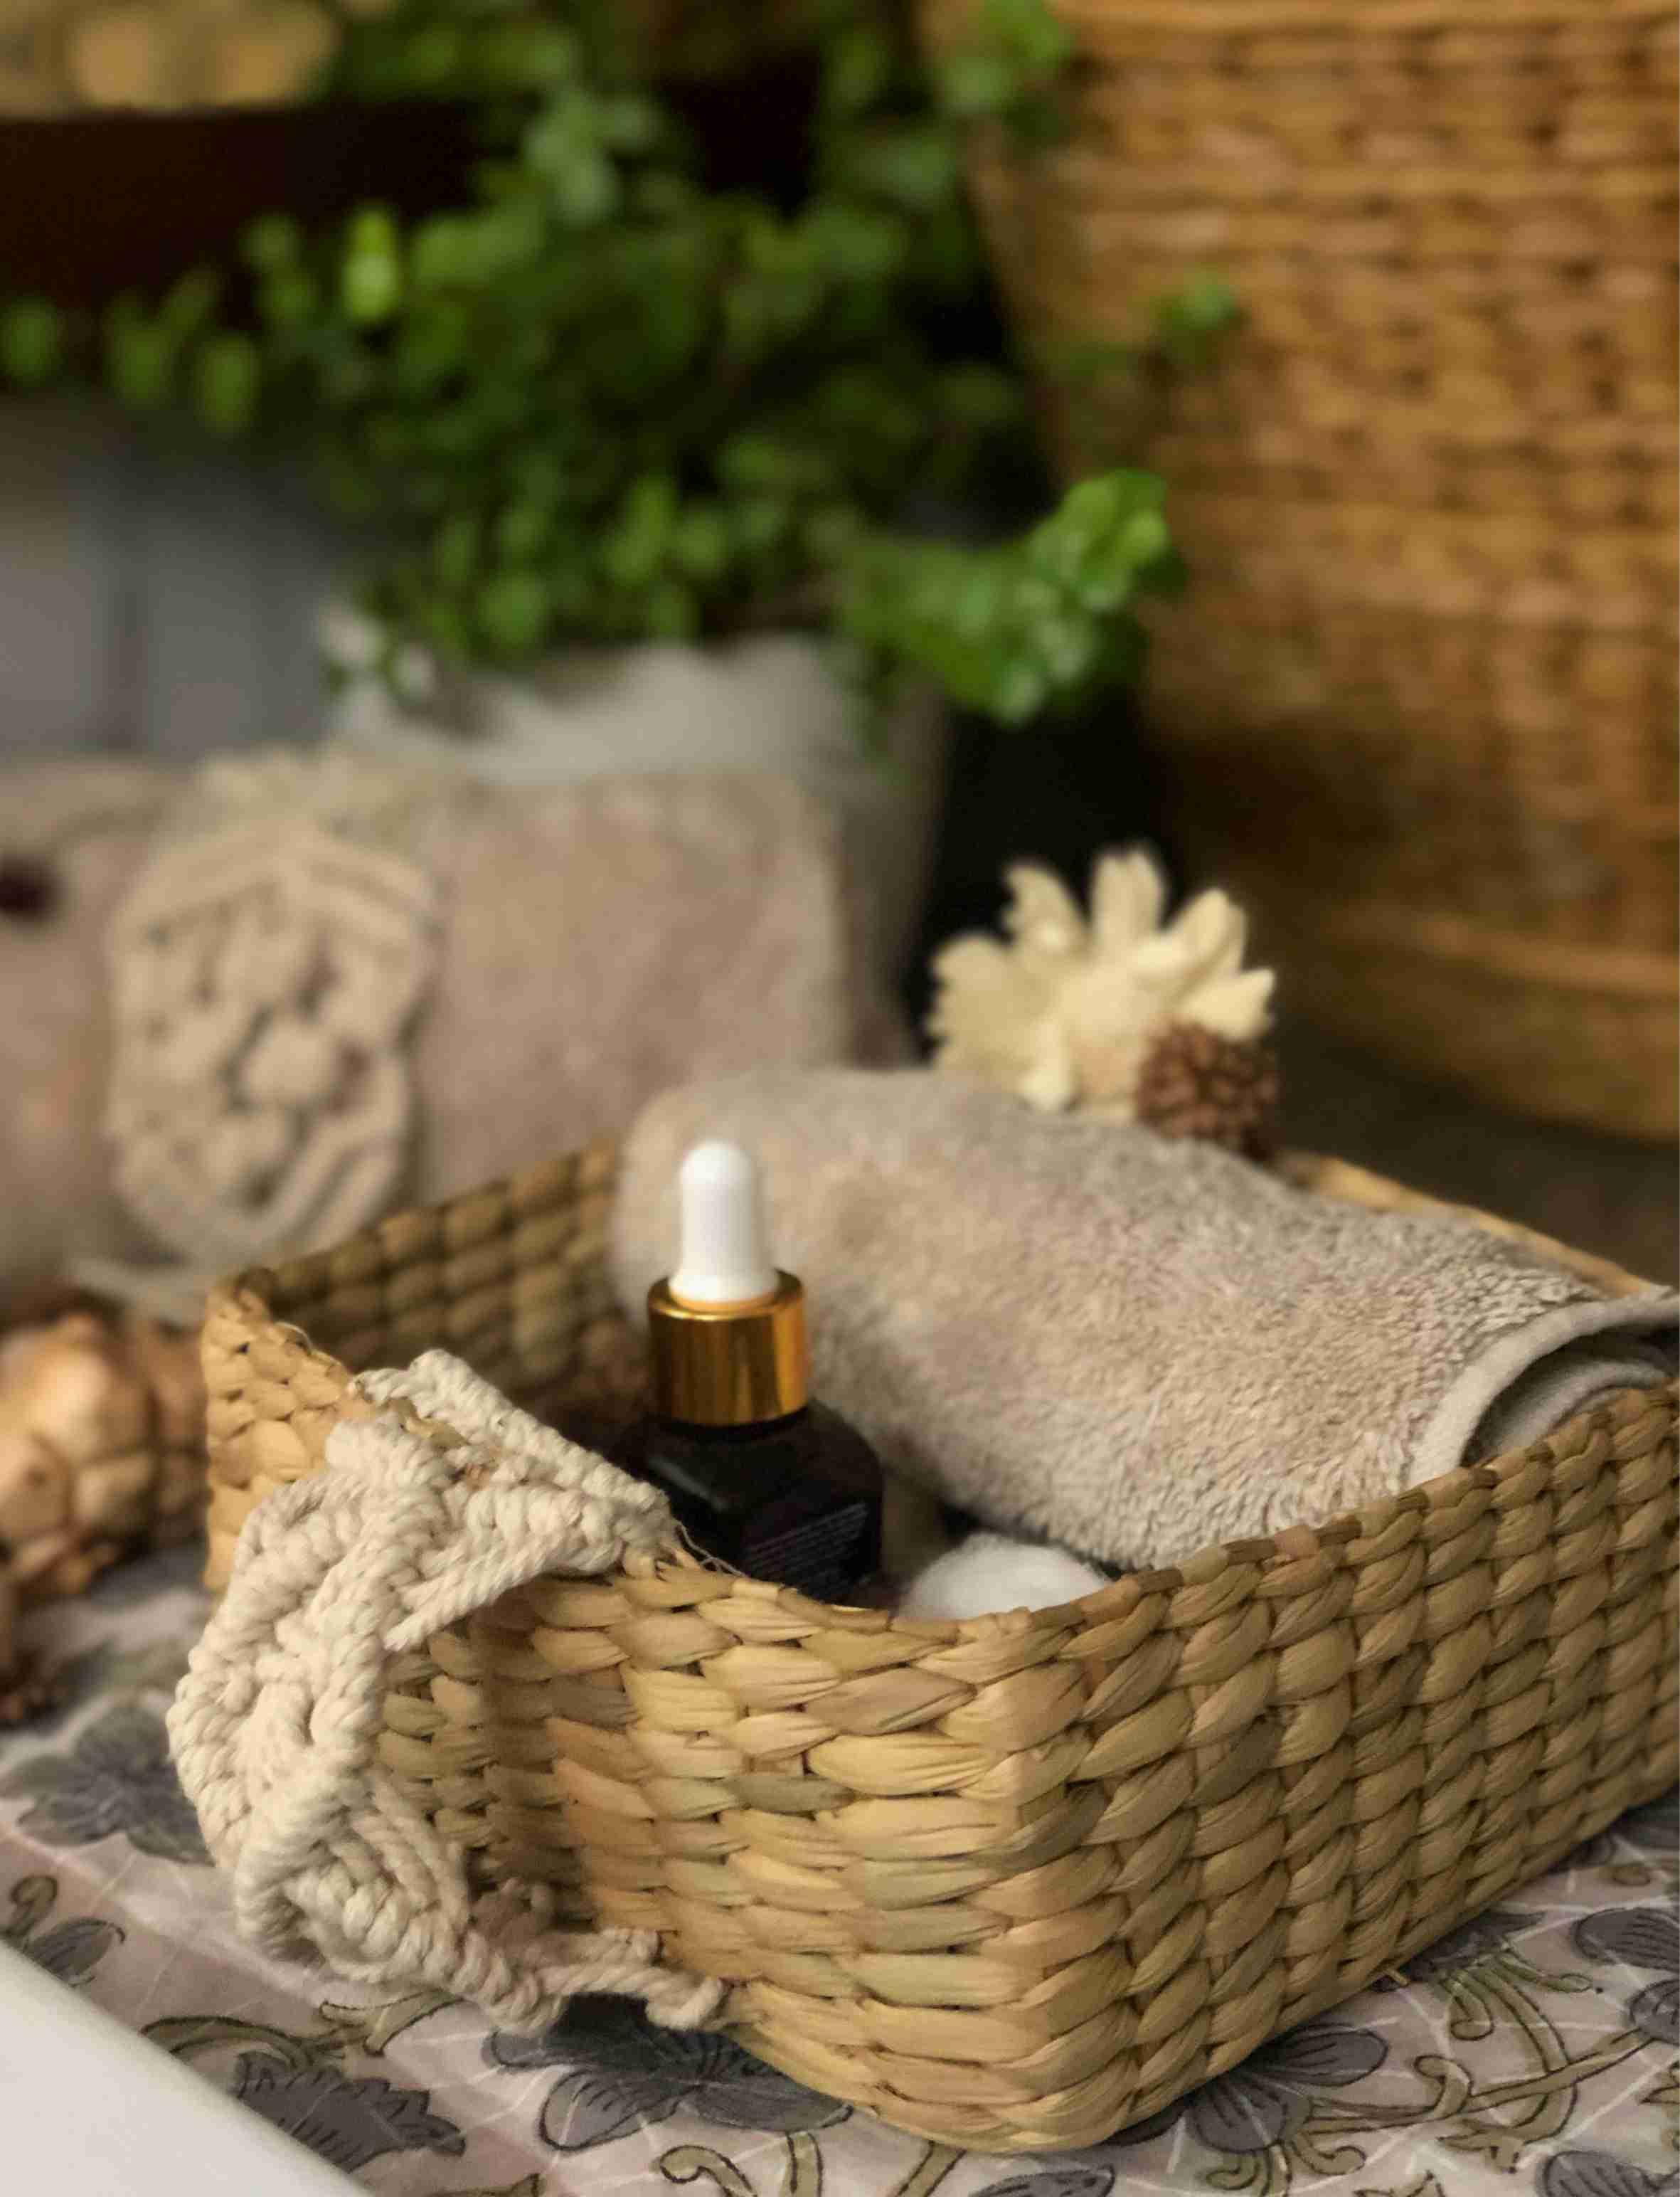 Macrame Spa Tray with handles - self care basket. (Made to order)